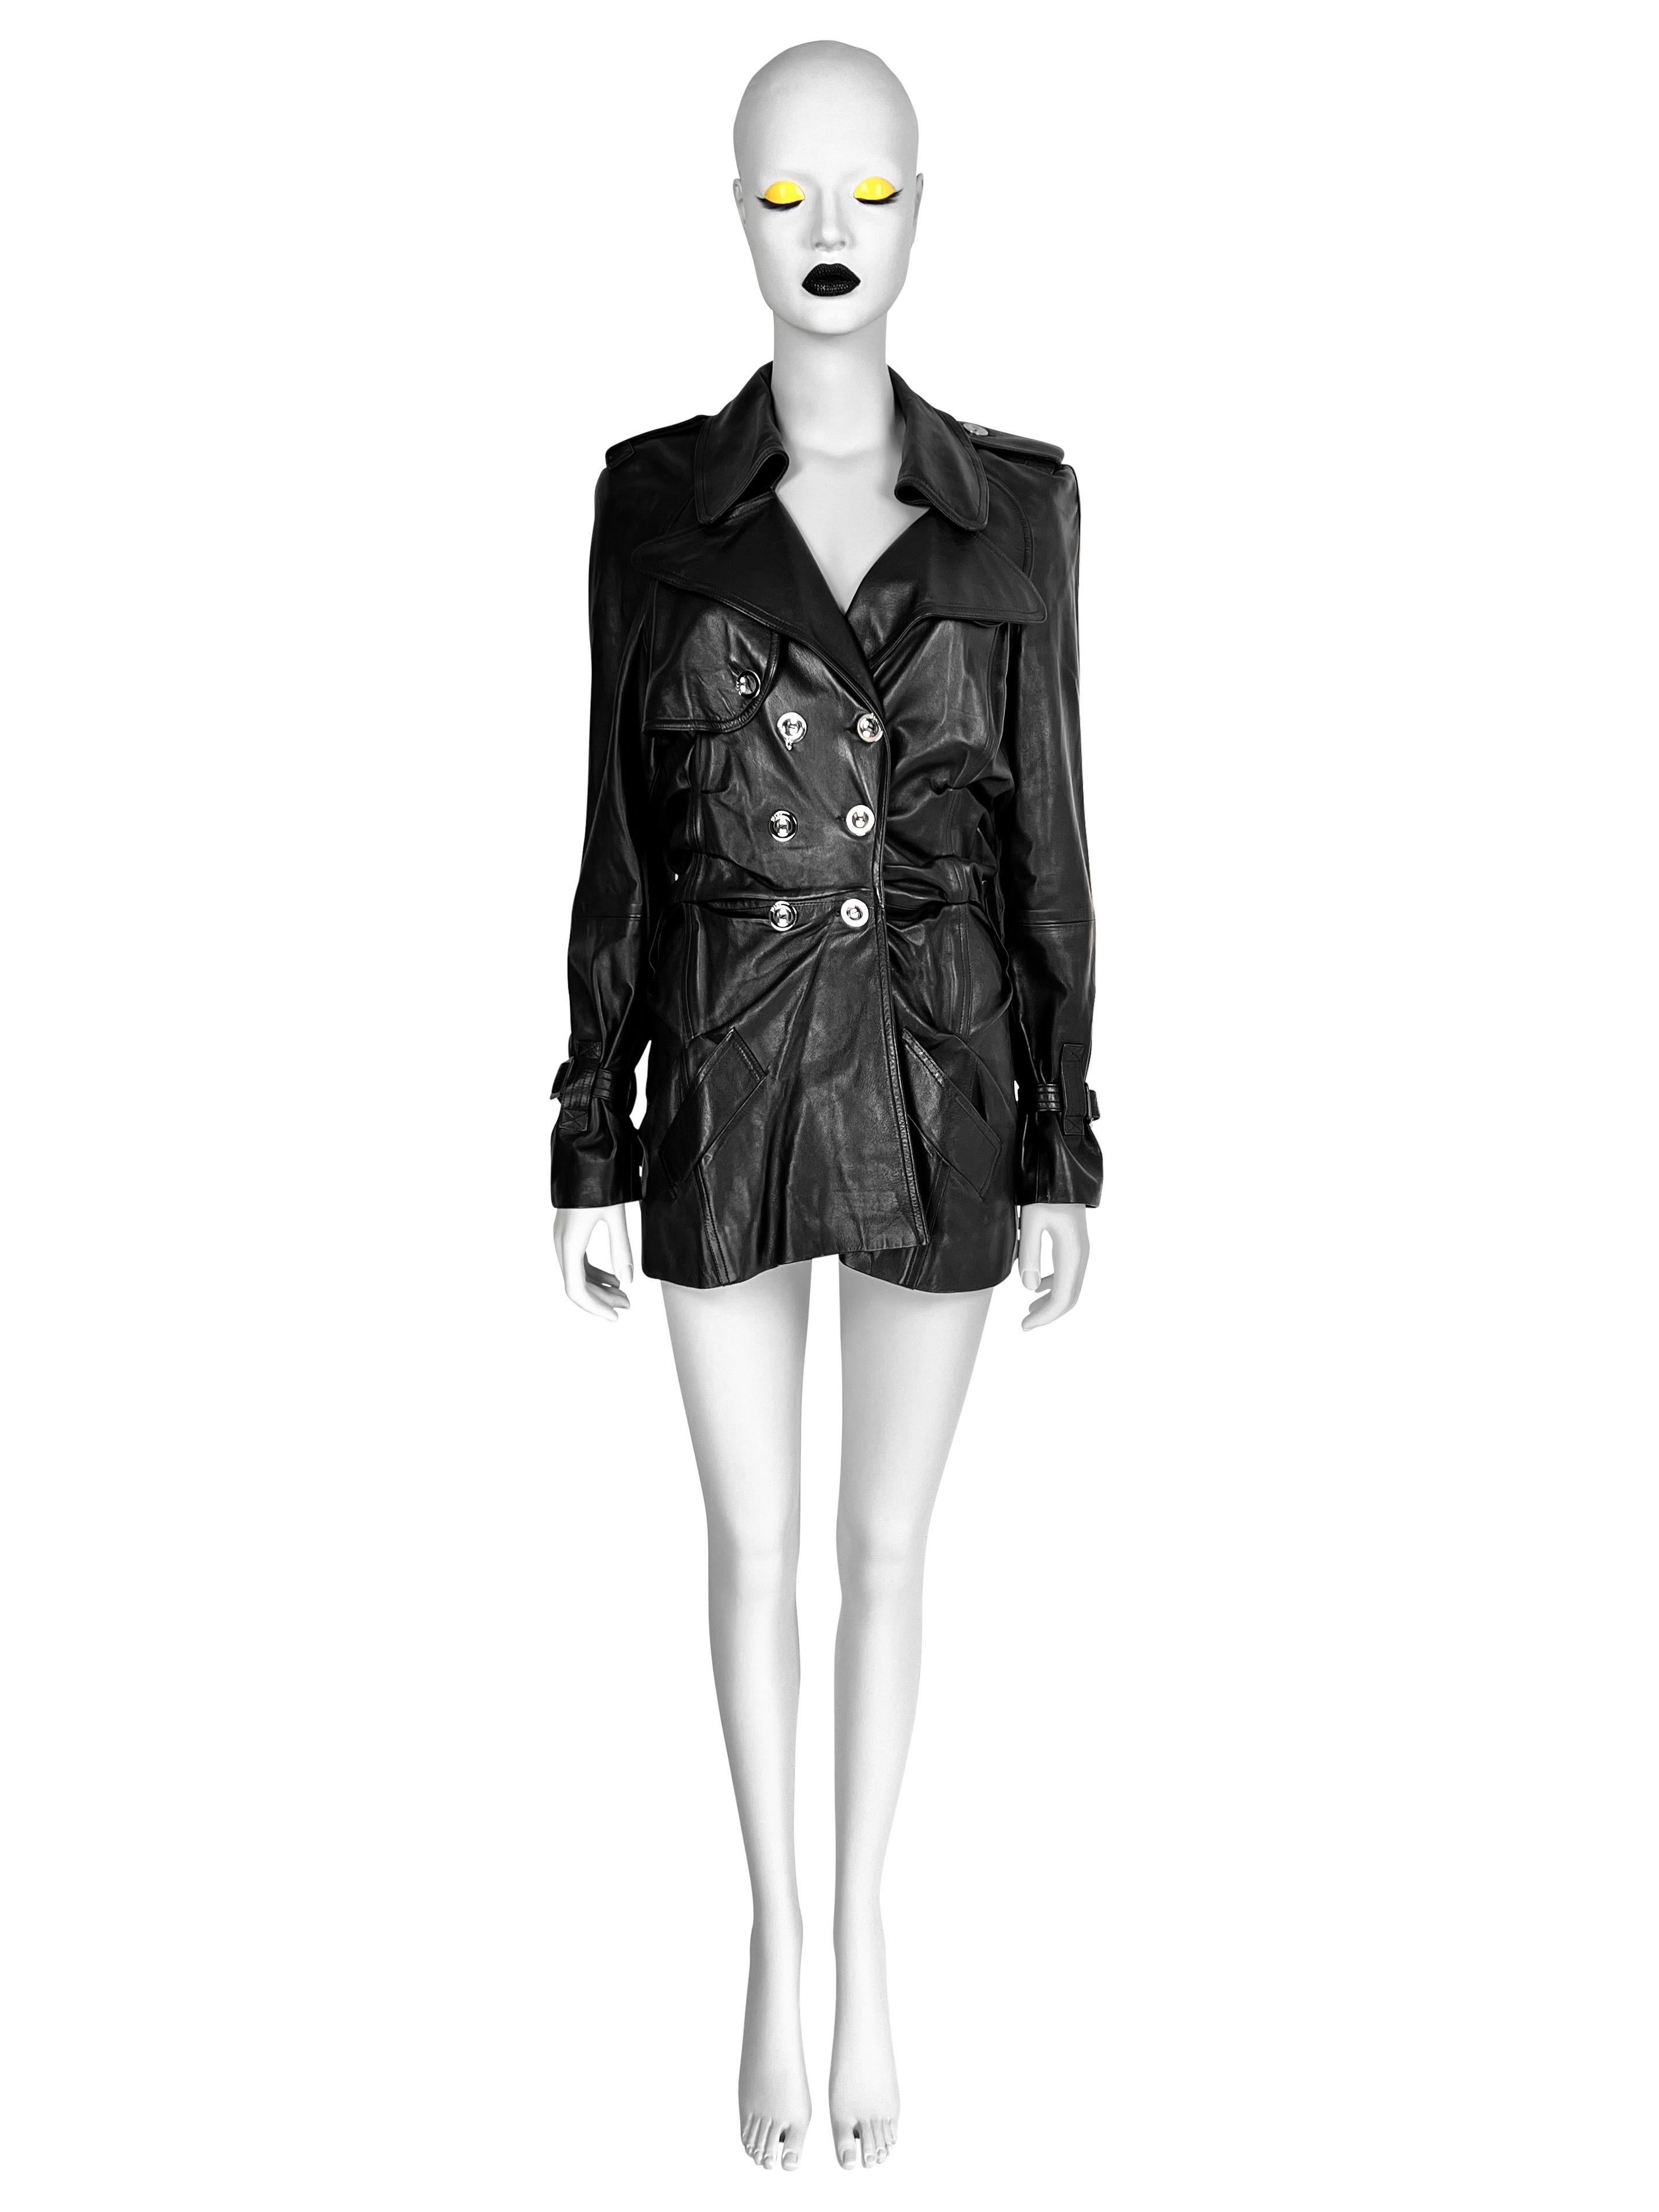 Spring 2004 RTW Dior by John Galliano  Draped Leather Jacket In Excellent Condition For Sale In Prague, CZ